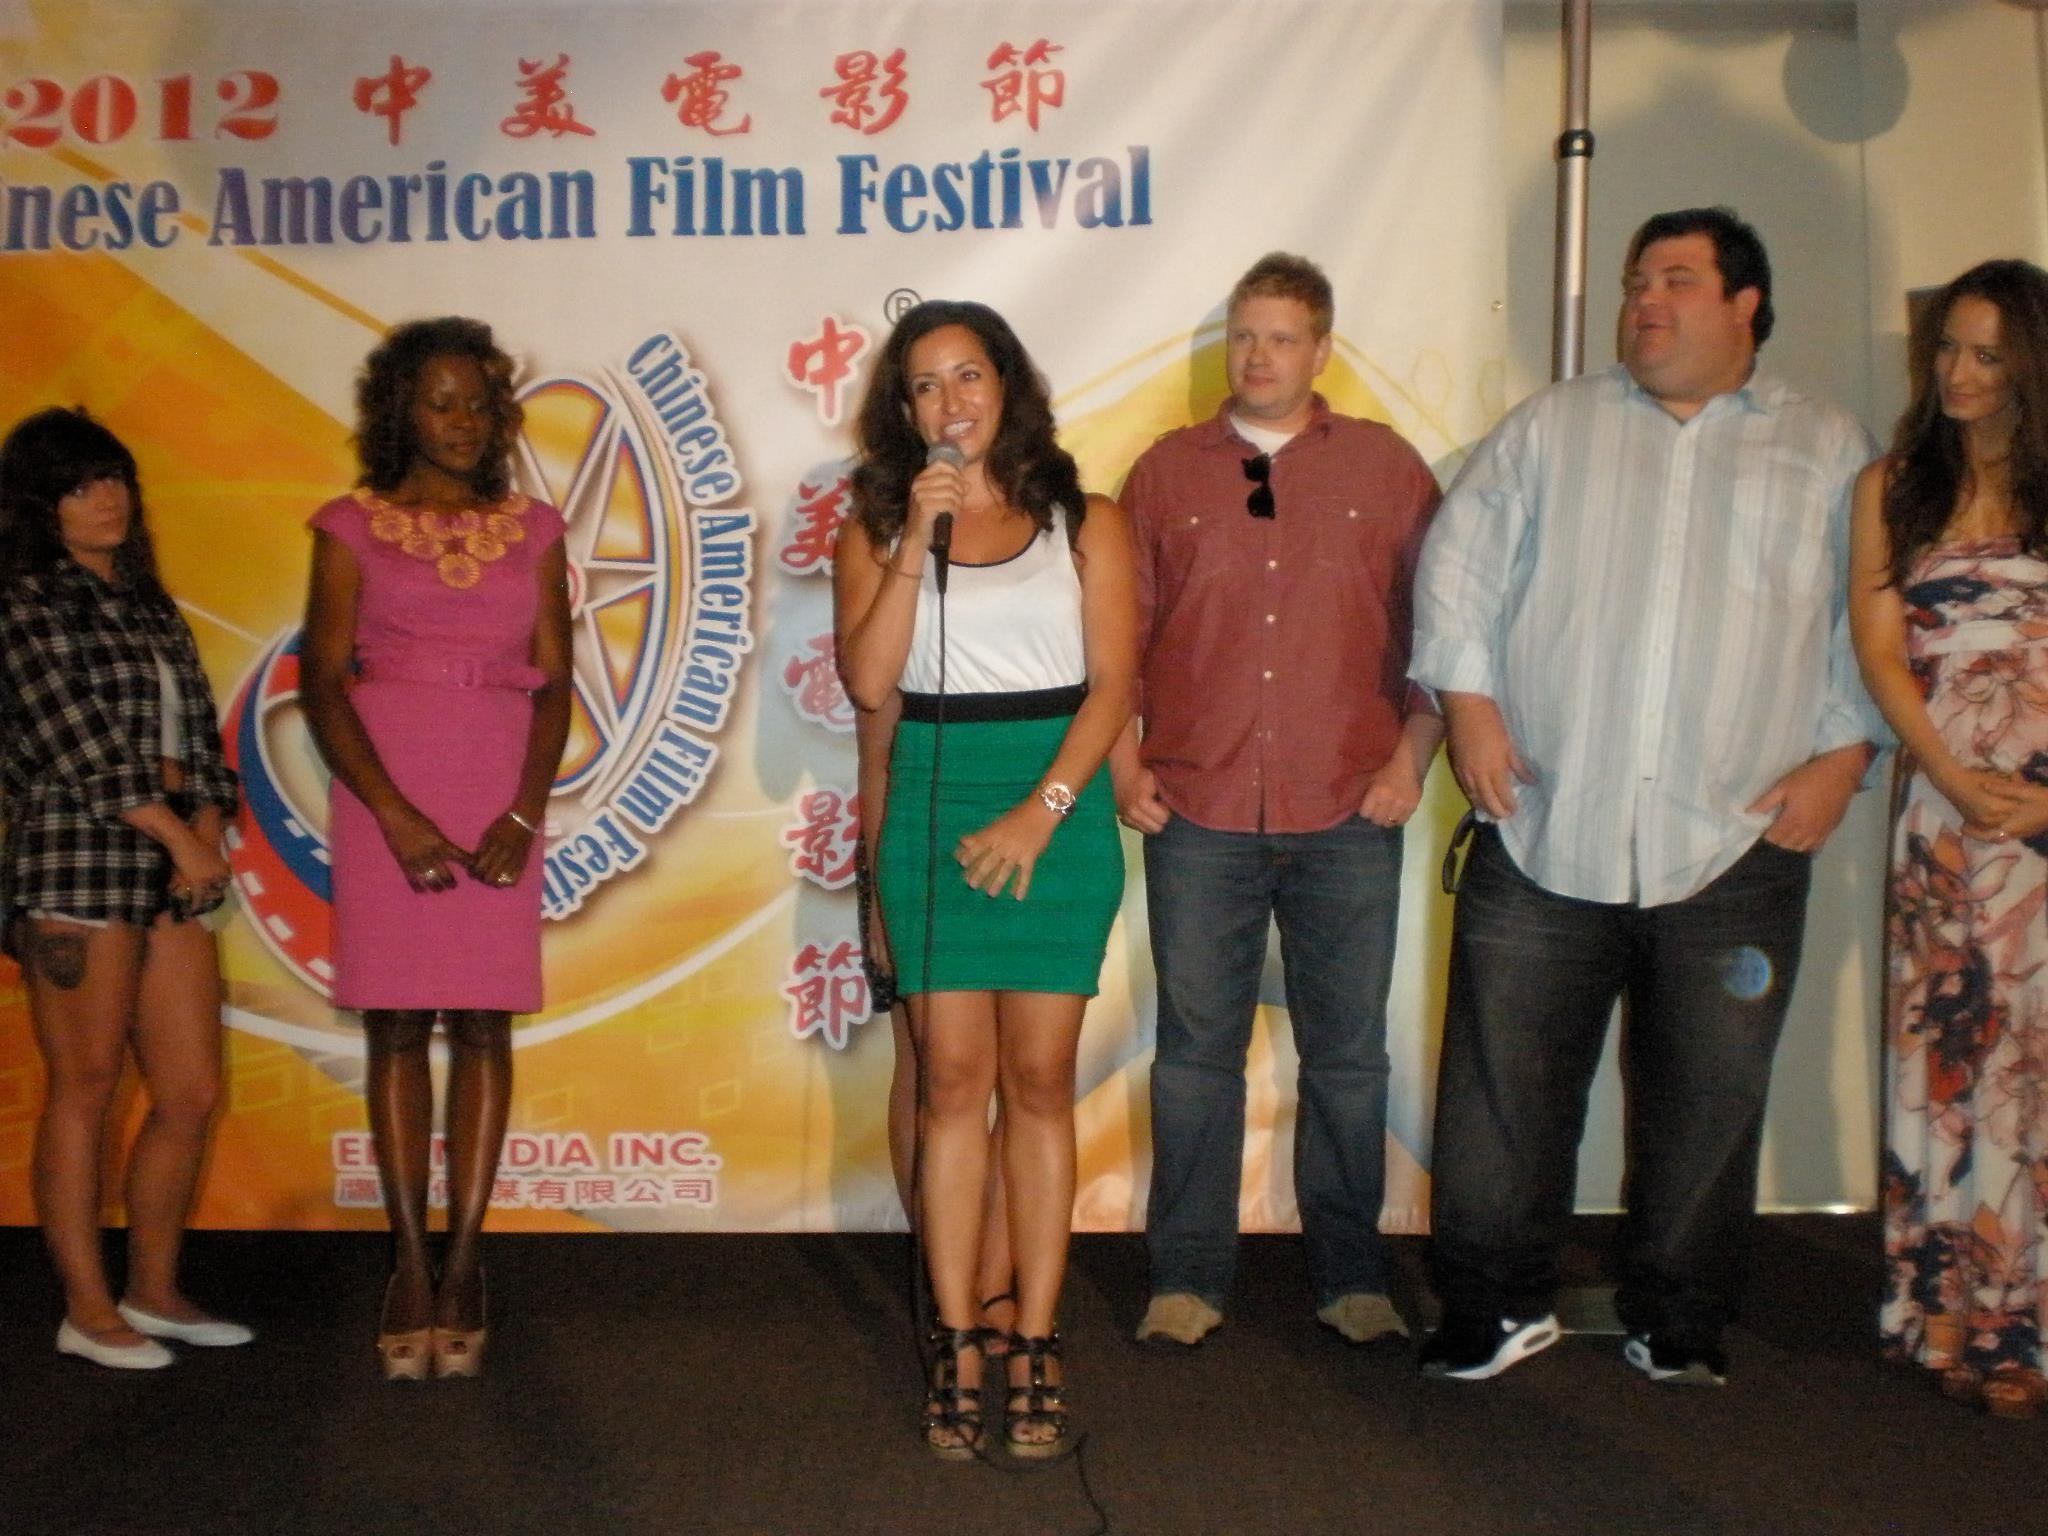 Press Conference for Chinese American Film Fest. 2012.